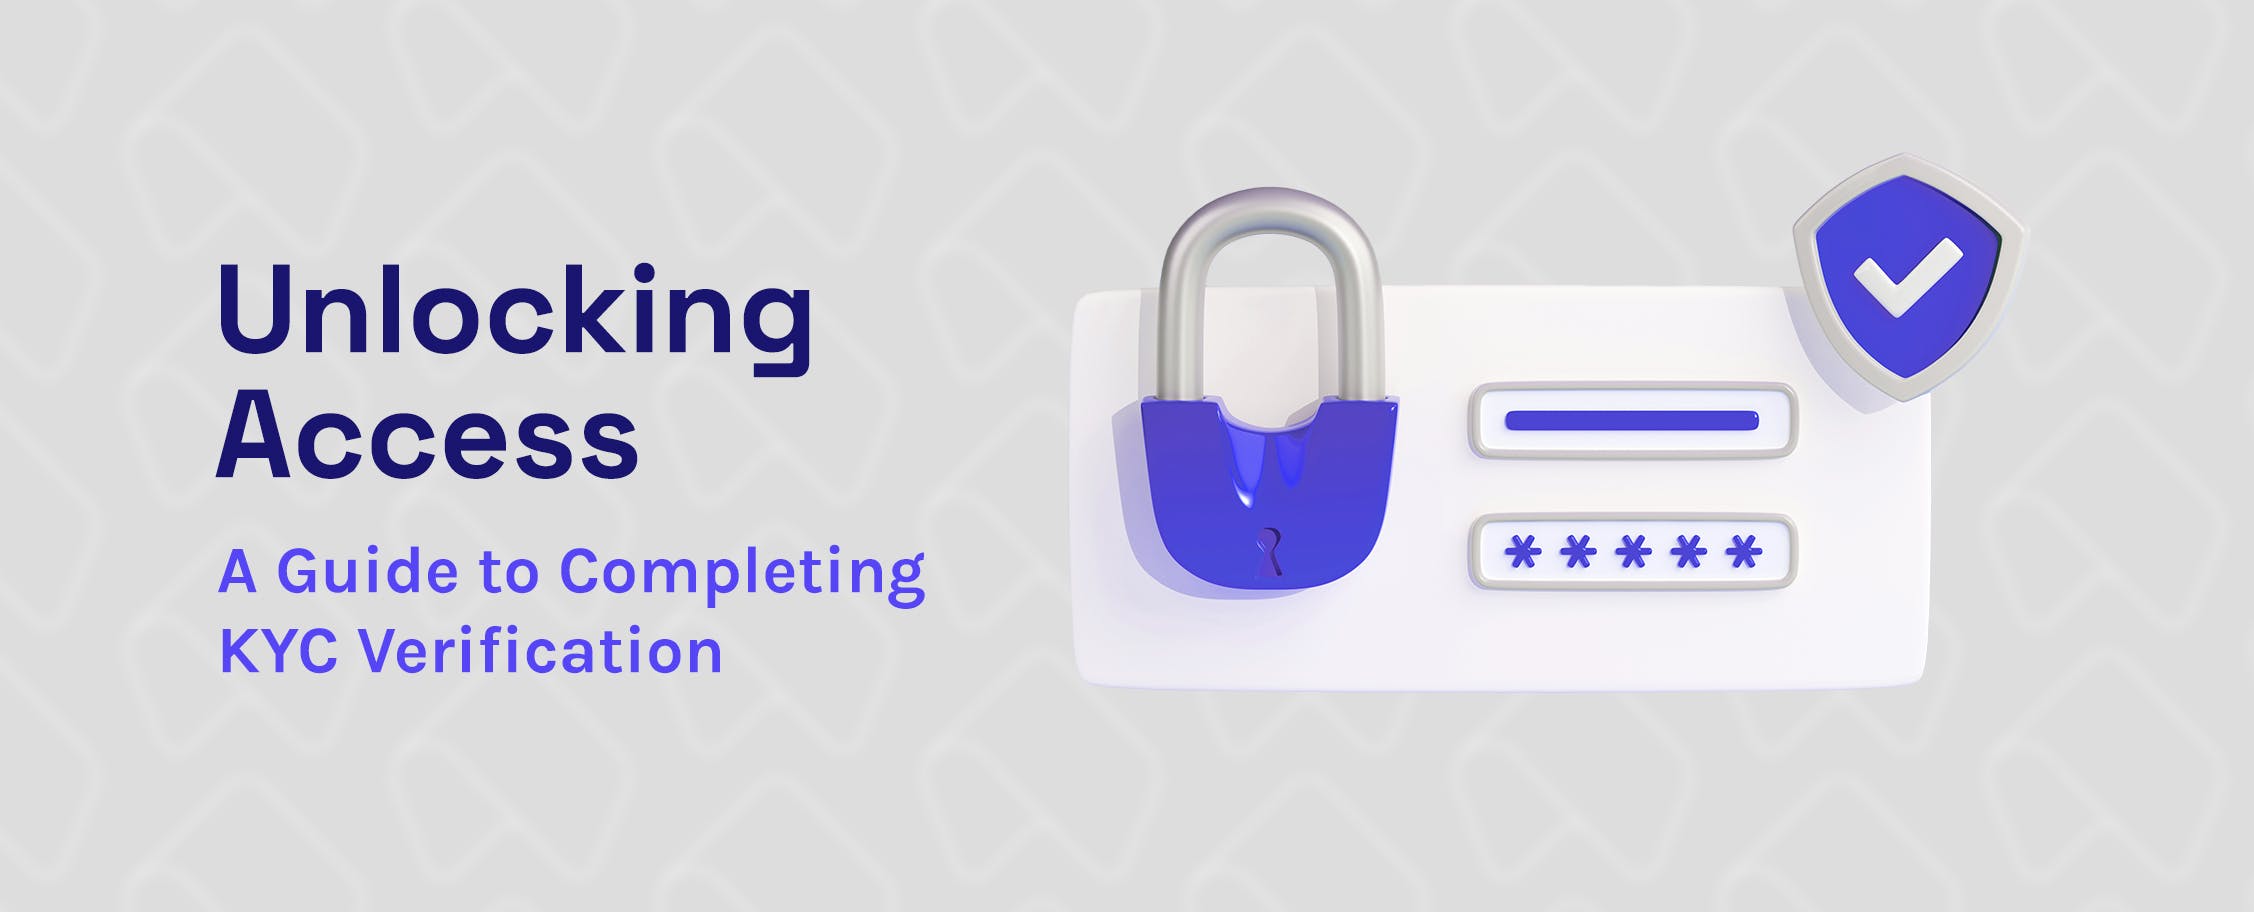 Unlocking Access: A Guide to Completing KYC Verification